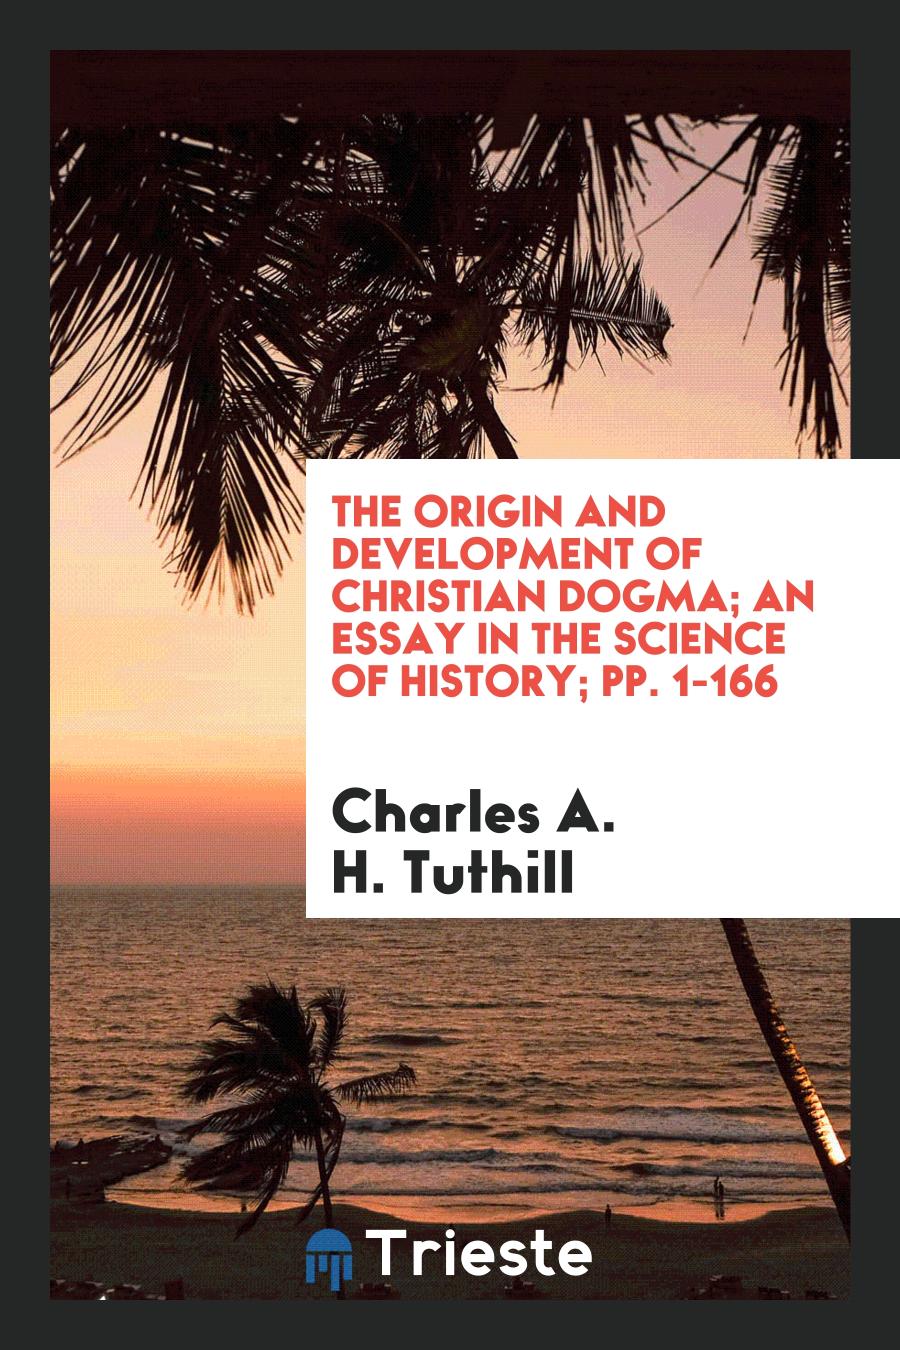 The Origin and Development of Christian Dogma; An Essay in the Science of History; pp. 1-166